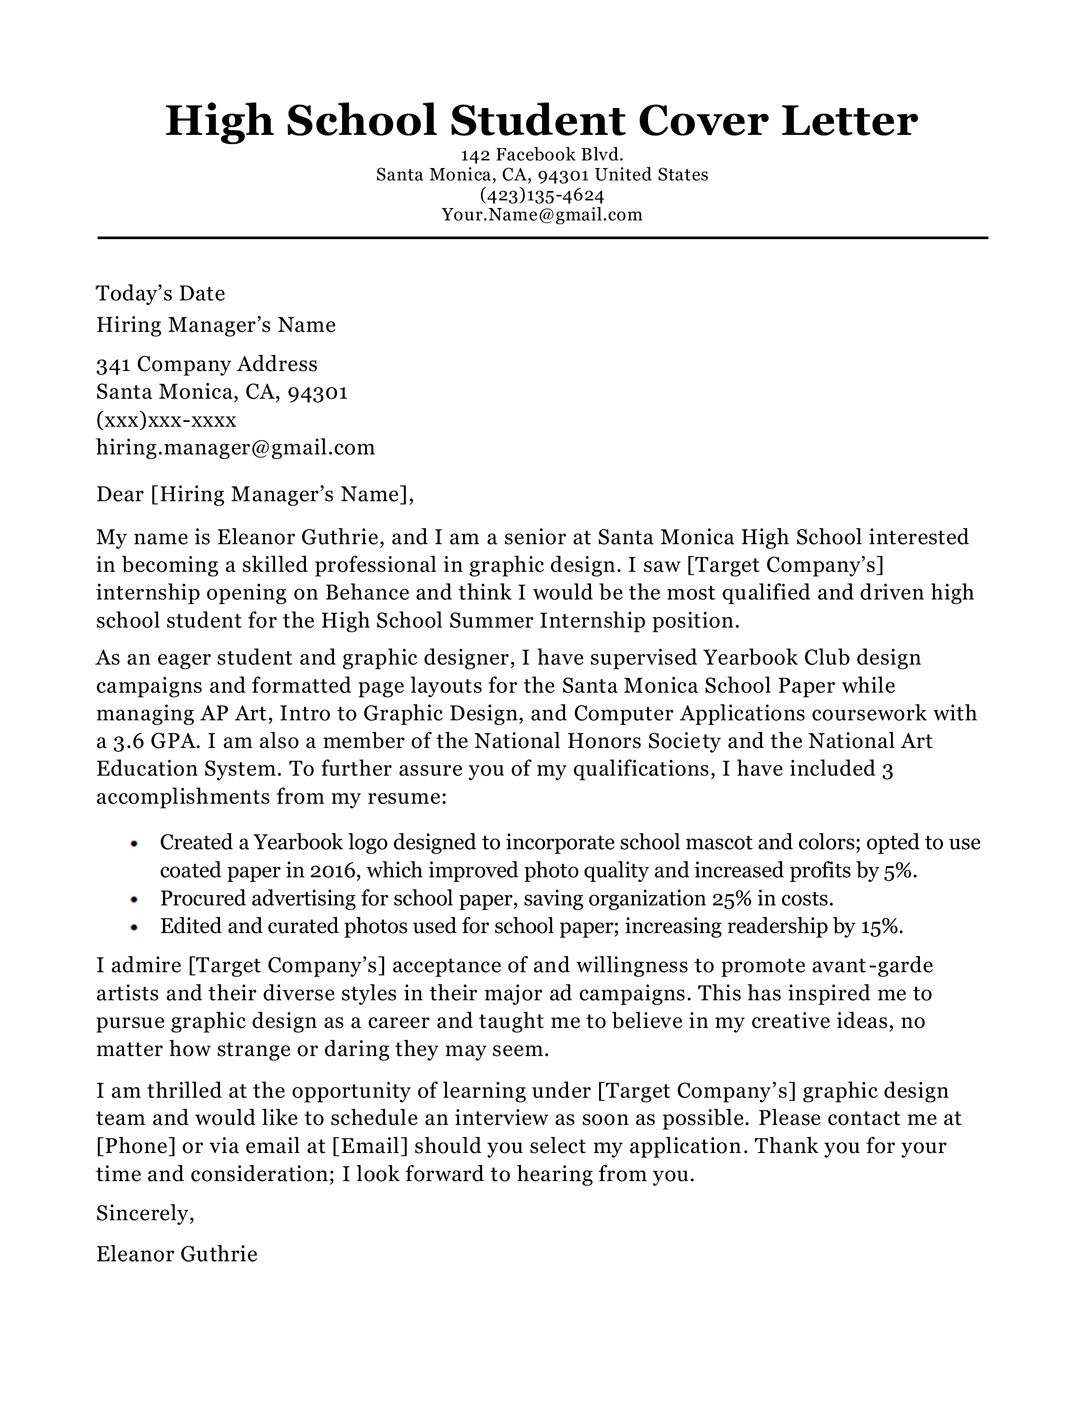 College Student Cover Letter For Internship from resumecompanion.com